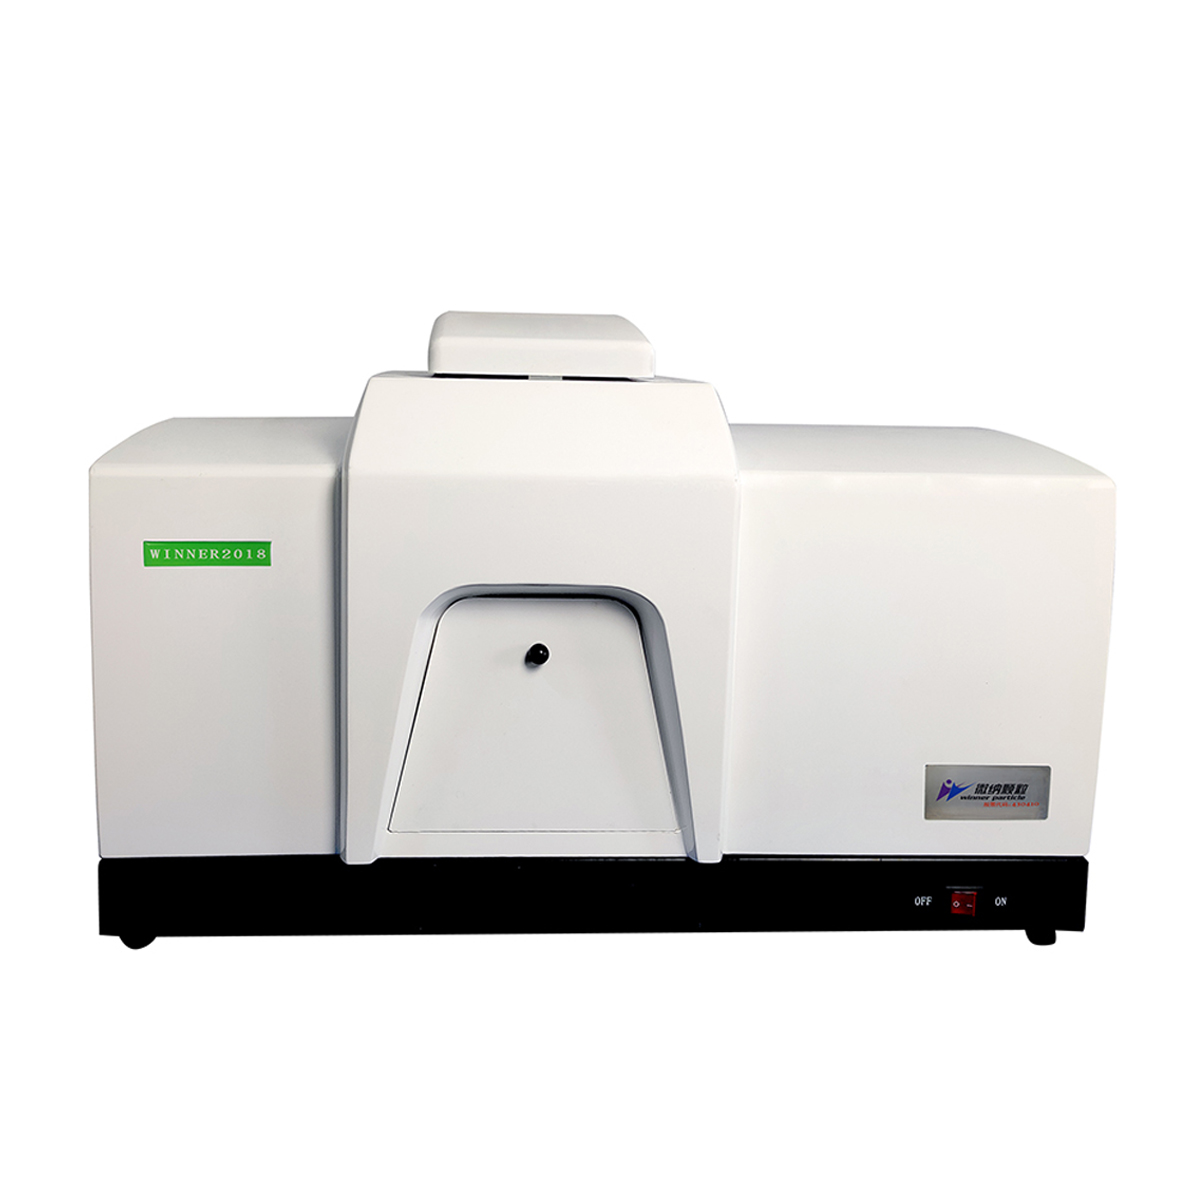 Winner2018 Automatic Laser Particle Size Analyzer